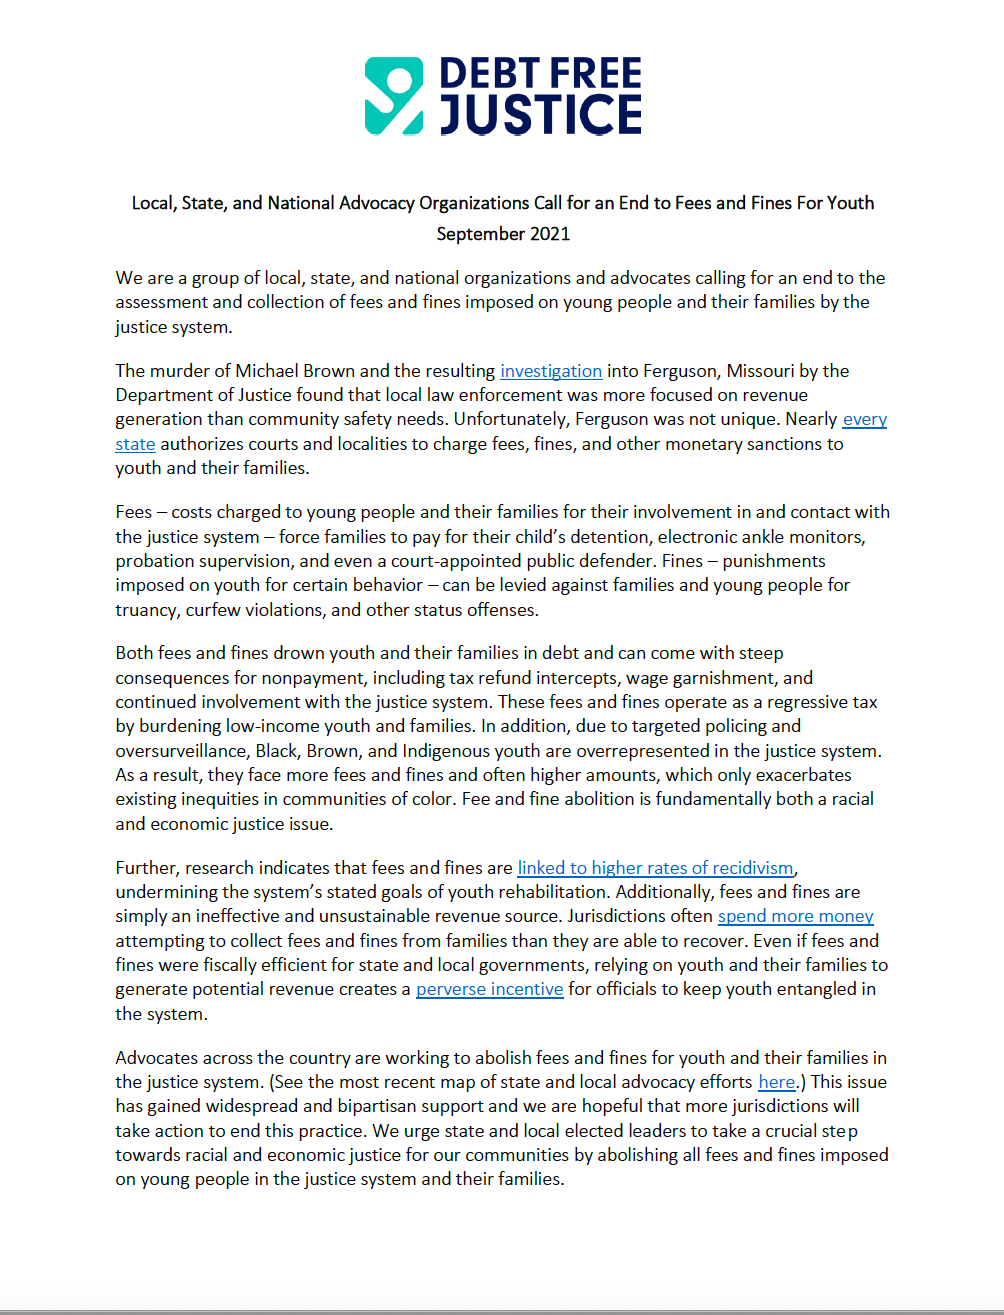 Local, state, and national advocacy organization statement in support of ending fees and fines for youth